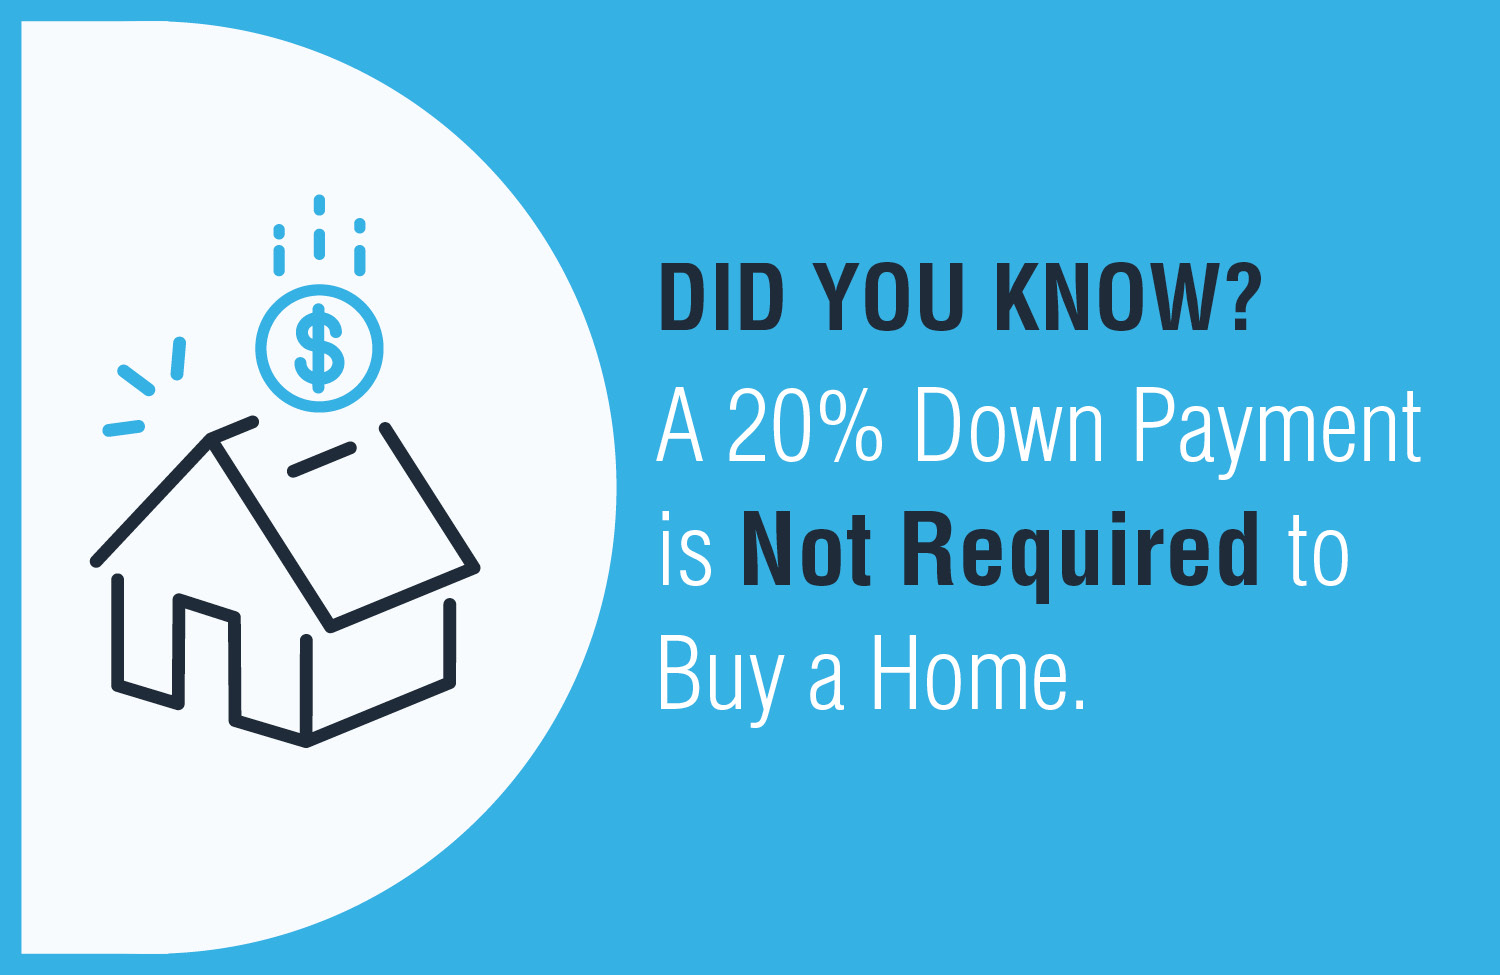 DID YOU KNOW - A 20% Down Payment is Not Required to Buy a Home